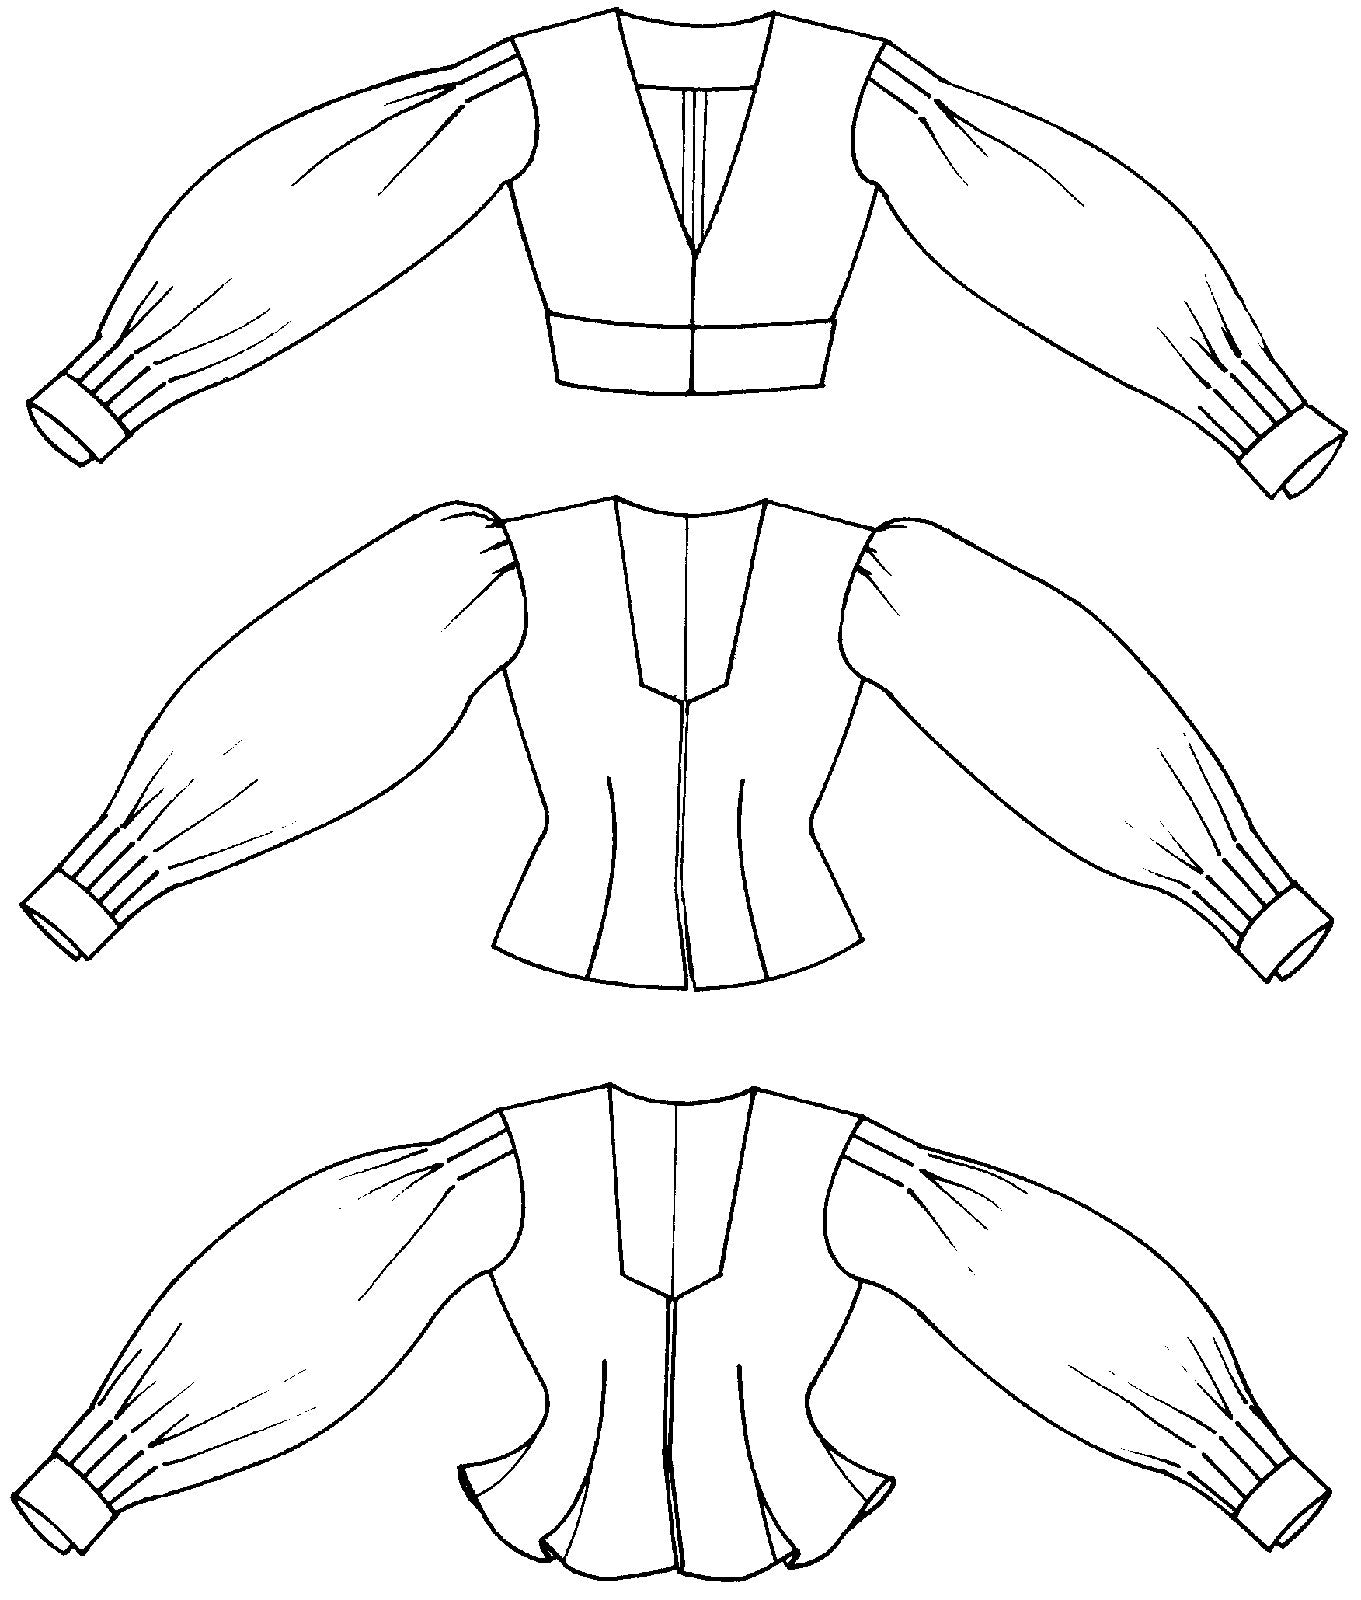 Flat line drawings of three views fronts.